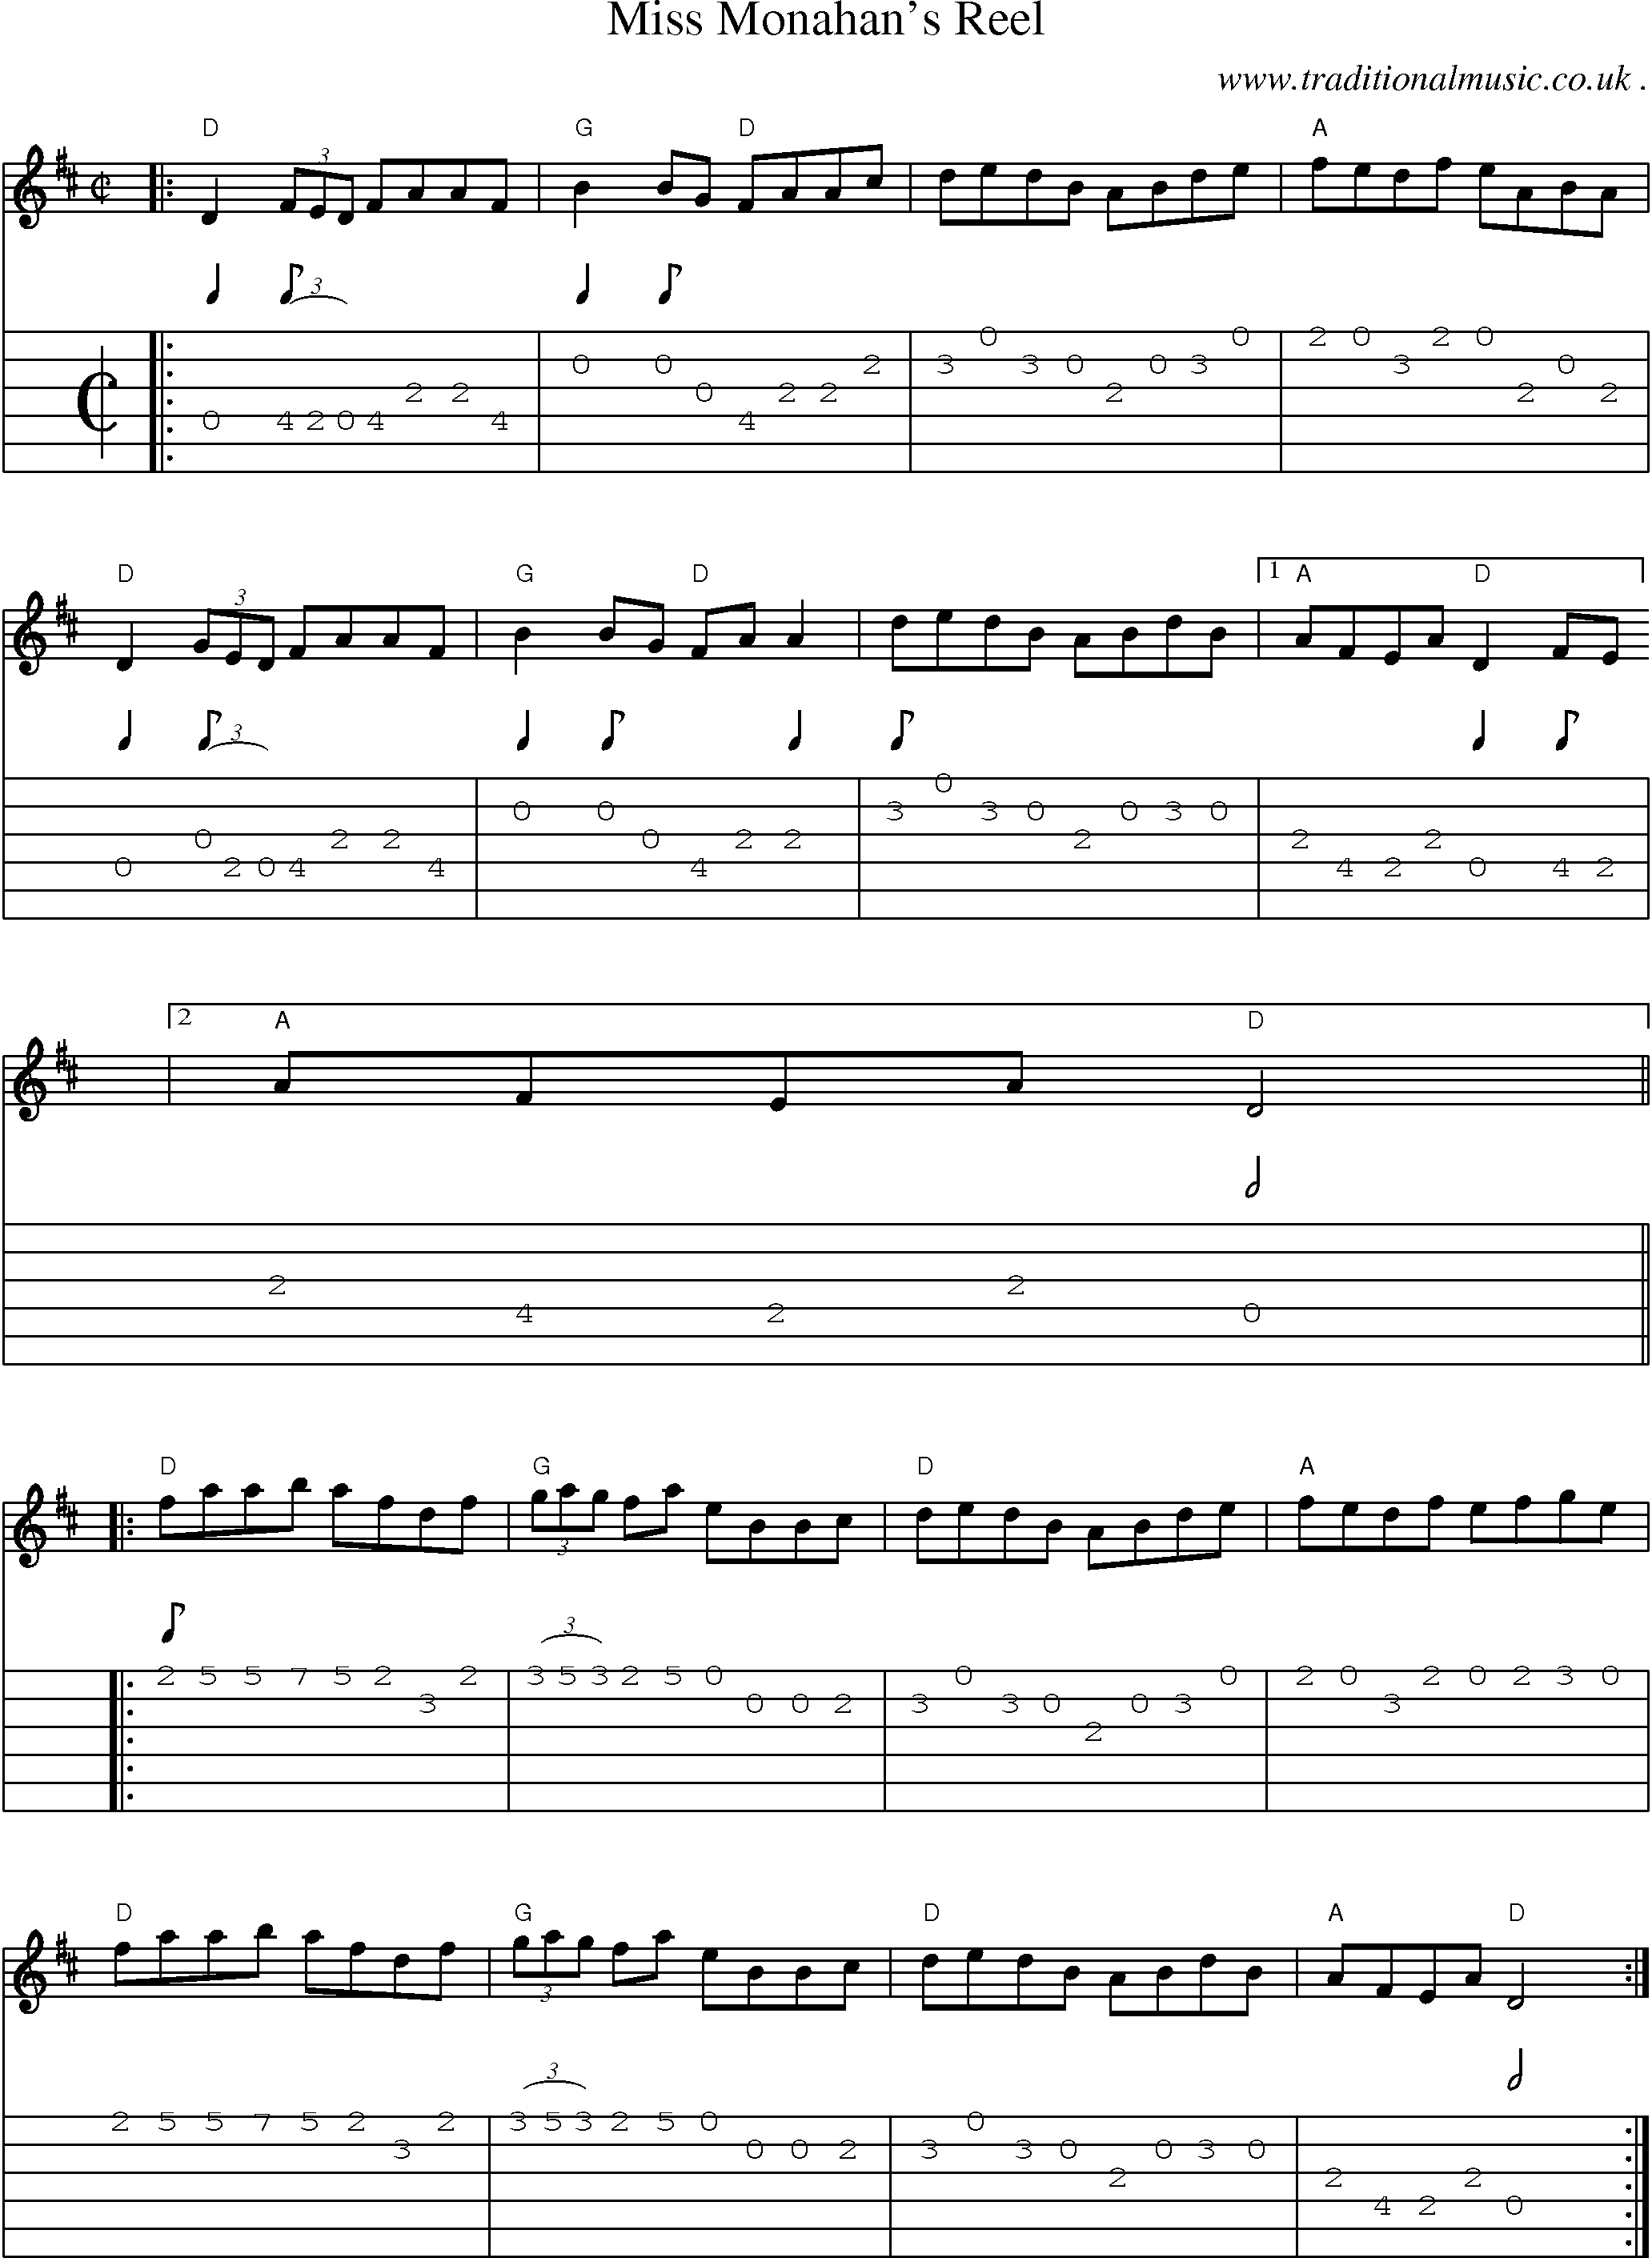 Music Score and Guitar Tabs for Miss Monahans Reel